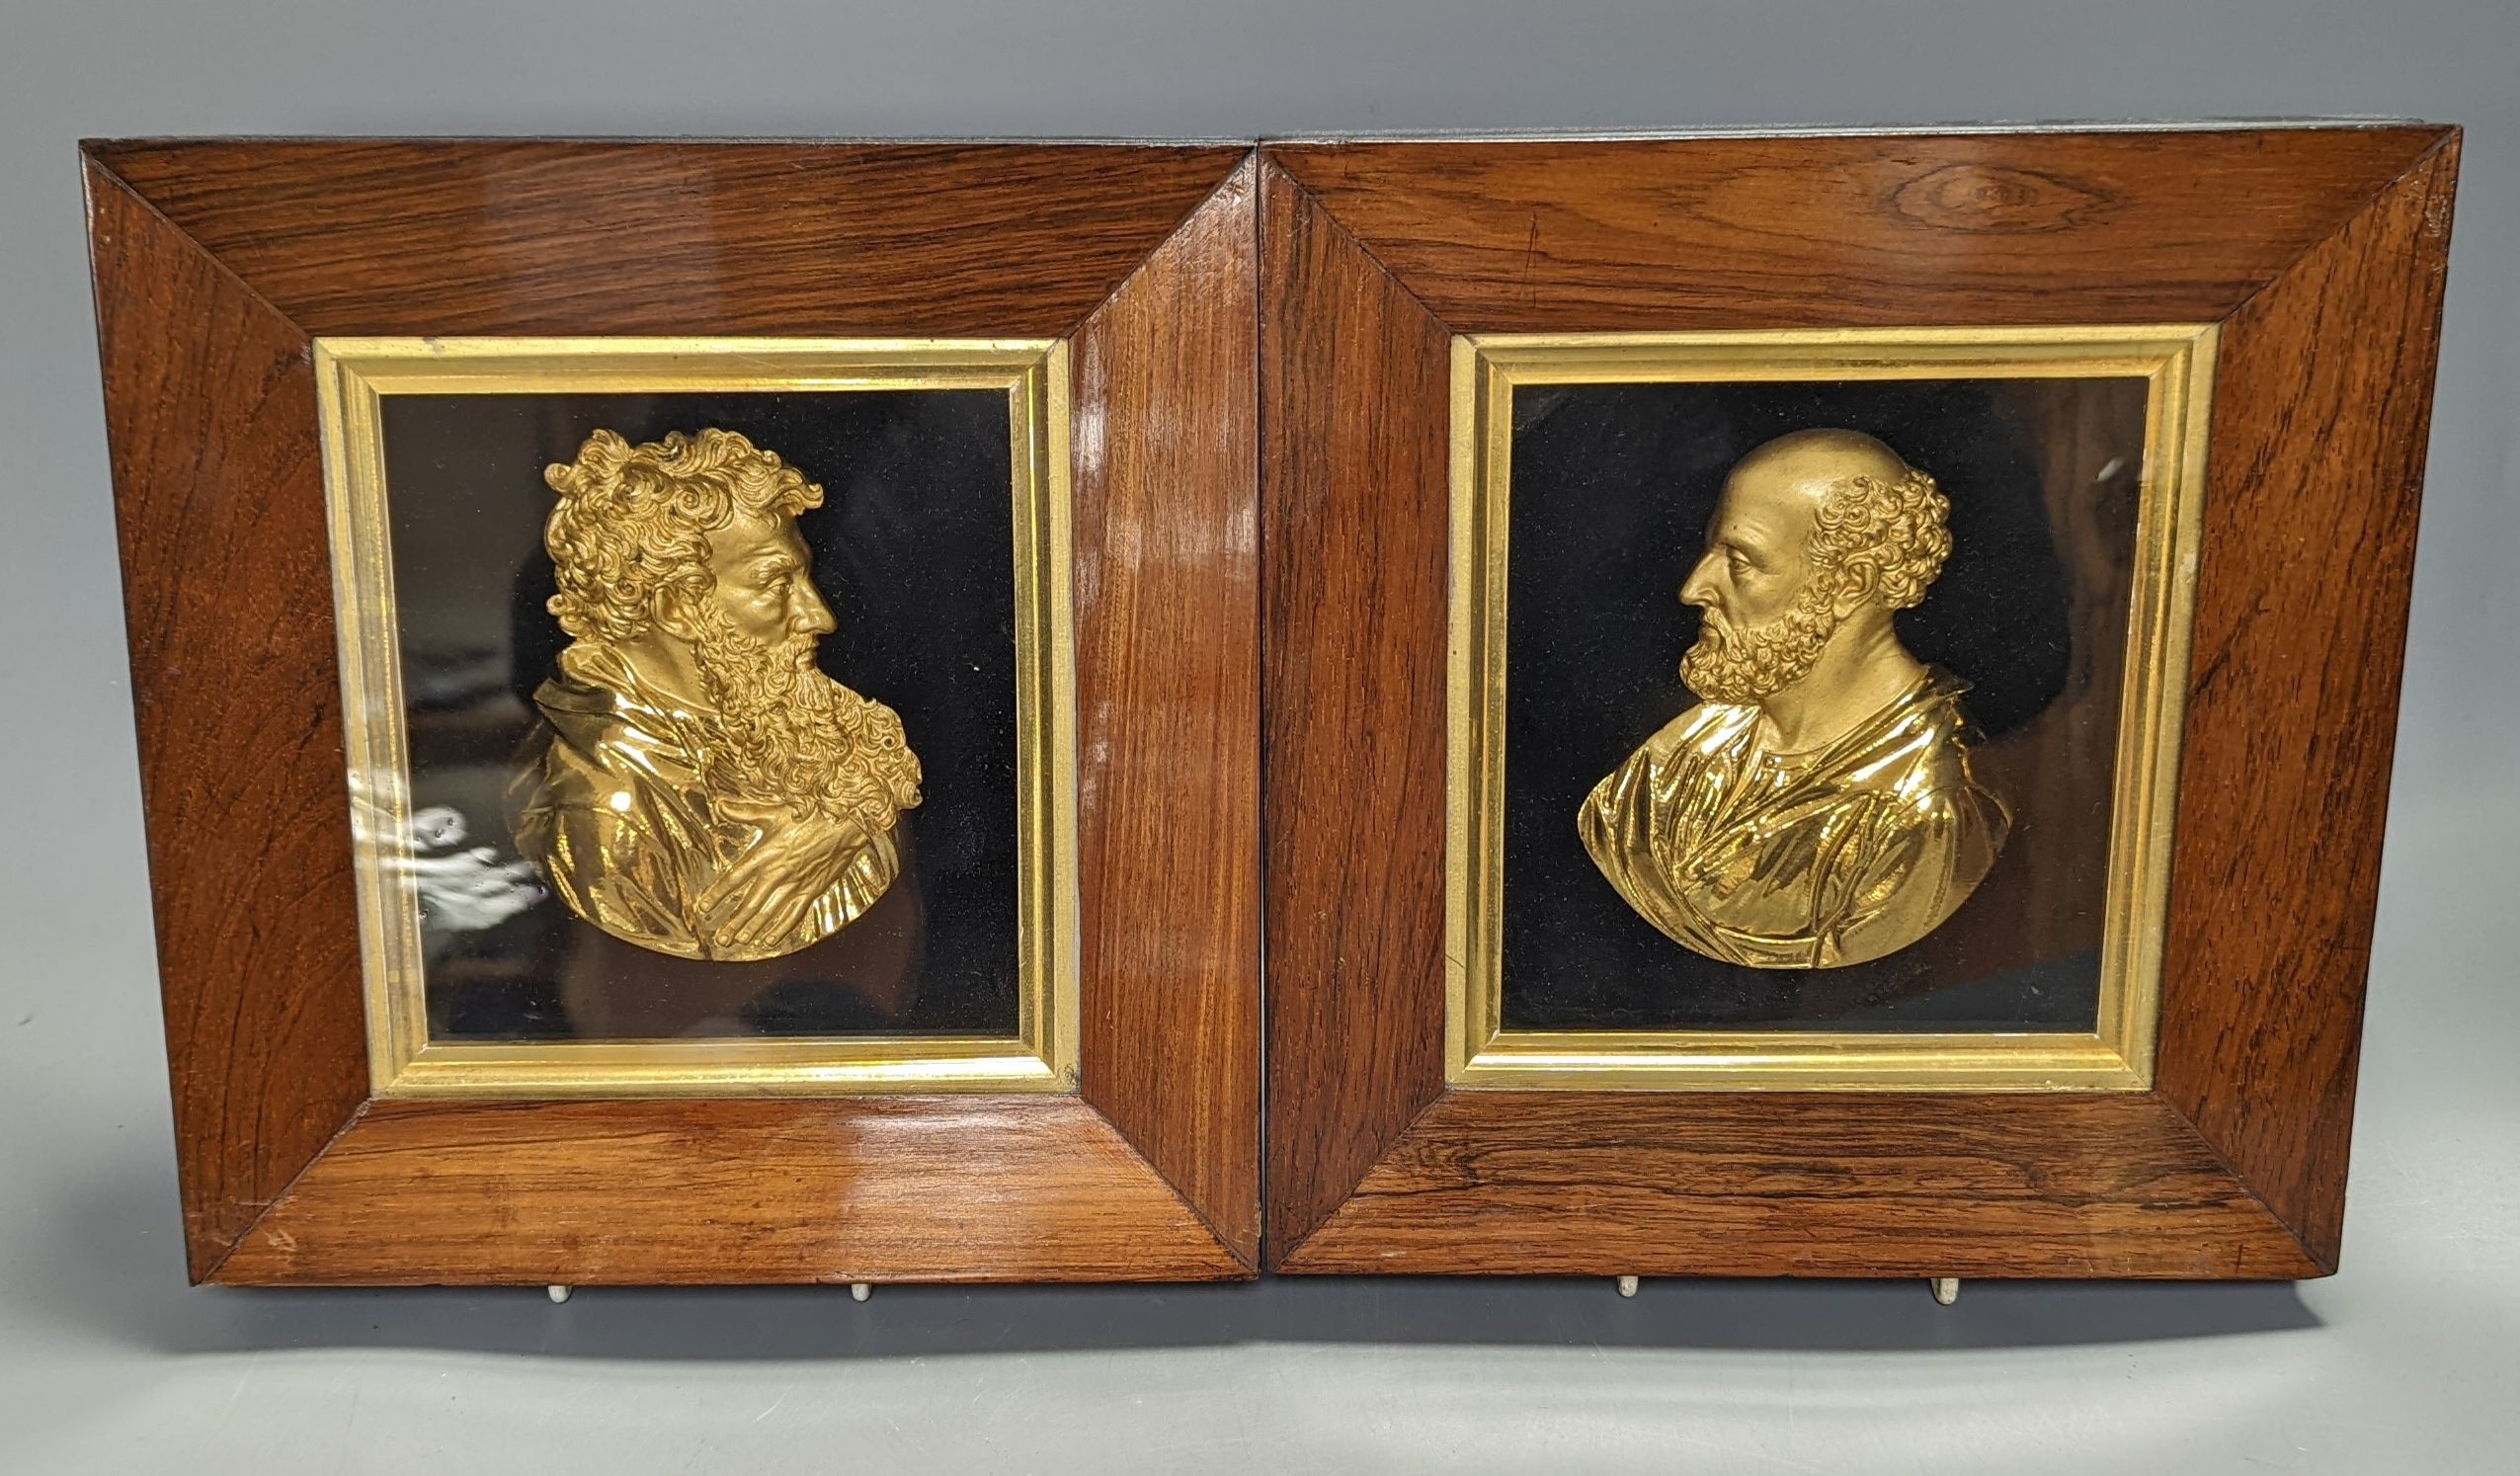 A pair of mid 19th century gilt-bronze portrait reliefs of Greek philosophers?, each in rosewood frames, width 23cm overall